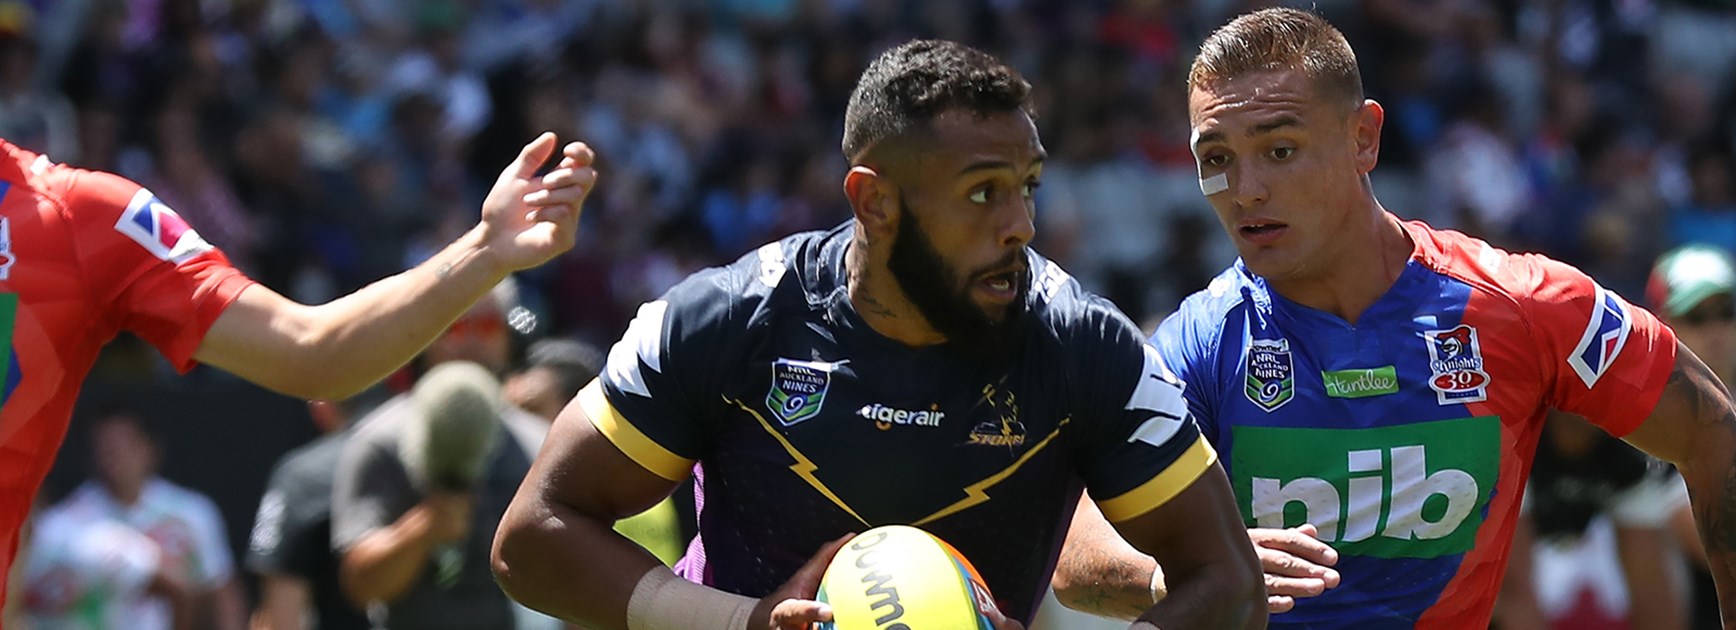 Storm winger Josh Addo-Carr in action against the Knights at the 2017 Auckland Nines.